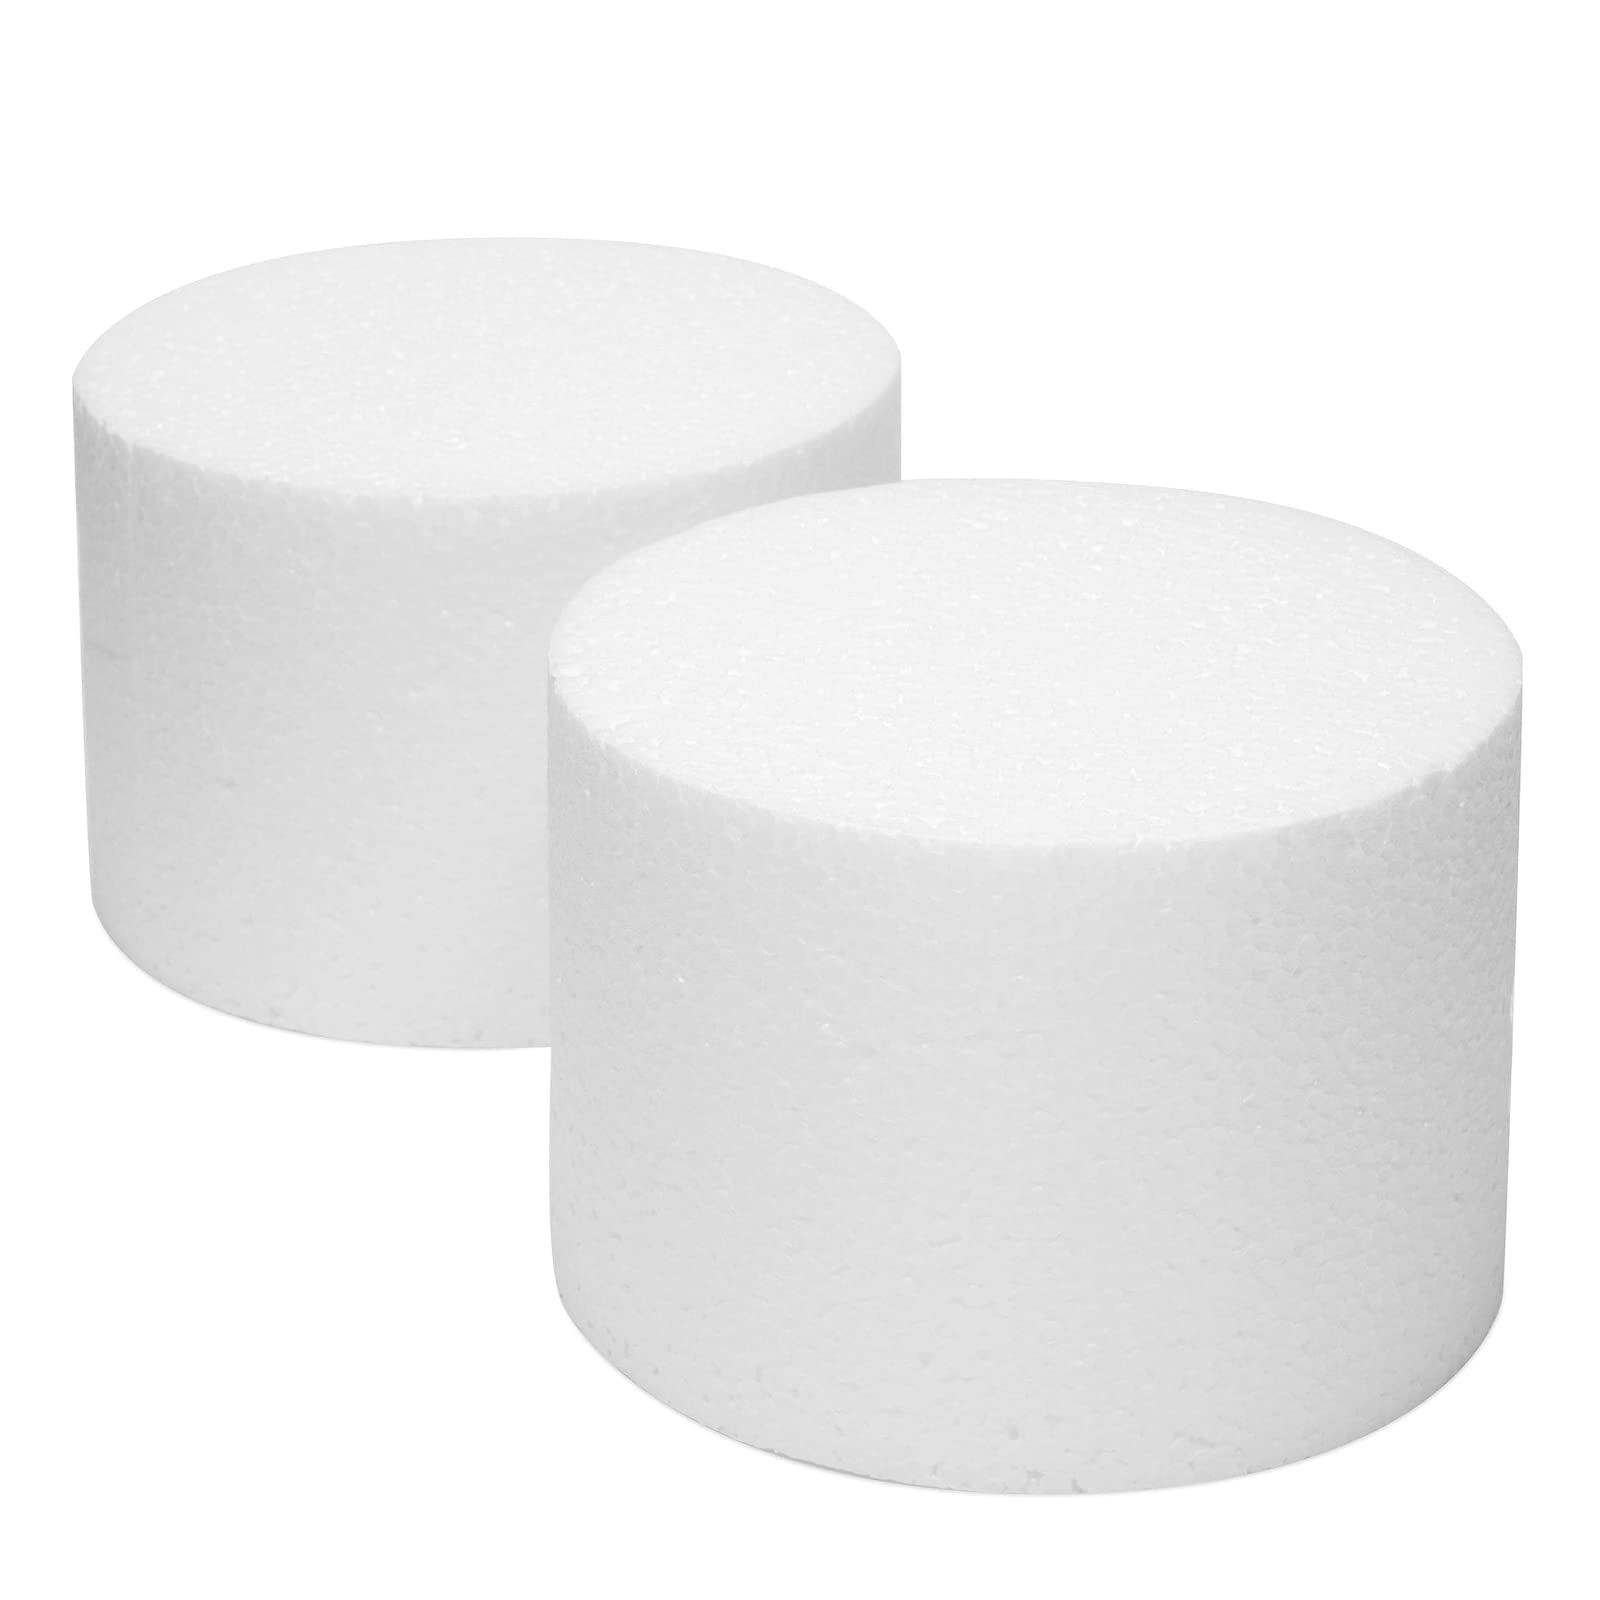 Bright Creations 2 Pack Foam Cake Dummies, 6x4 Inch Dummy Rounds for Decorating, Fake Wedding Cake